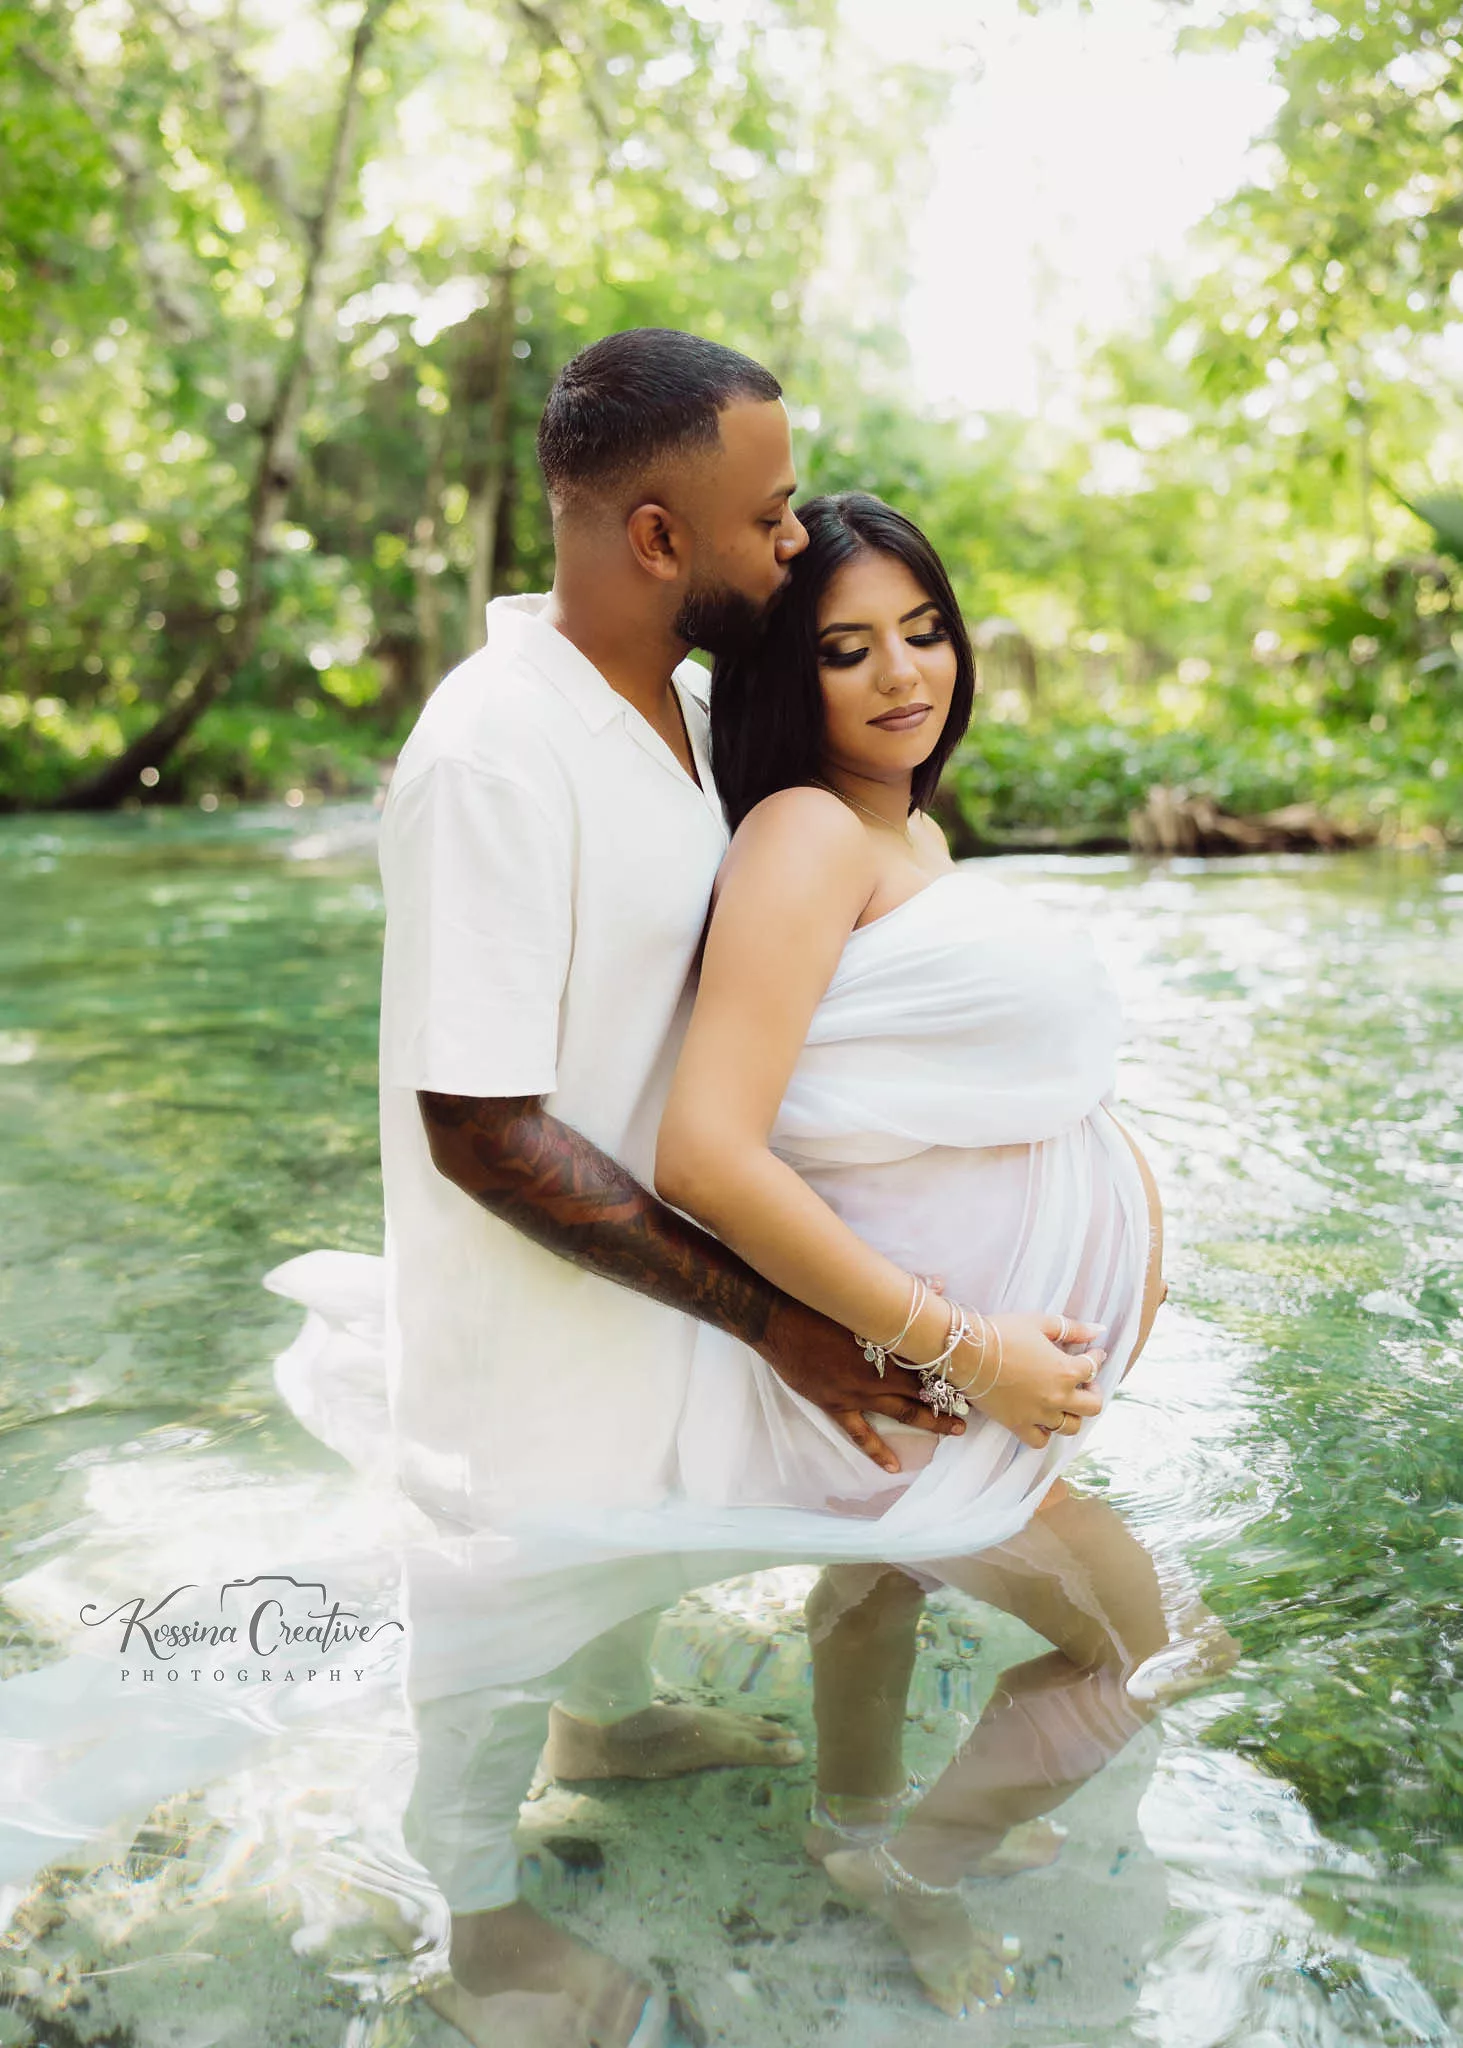 Orlando Maternity Photographer Pregnancy photography rock springs white dress in water